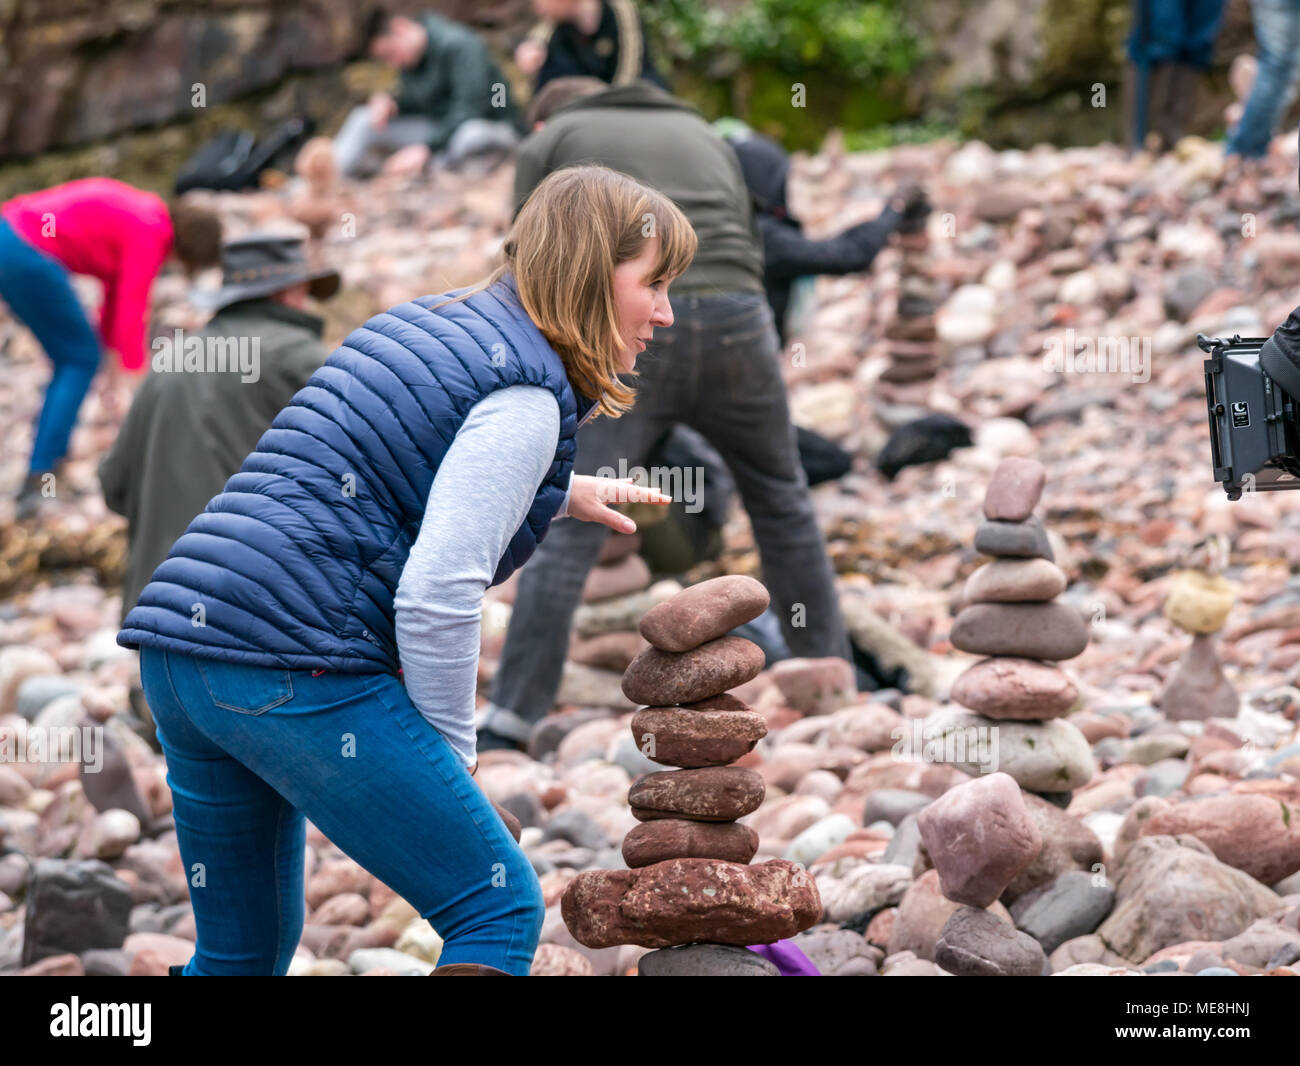 Dunbar, Scotland, 22 April 2018. Eye Cave Beach, Dunbar, East Lothian, Scotland, United Kingdom, 22nd April 2018. The second day of the Second European stone stacking championships took place this weekend in Dunbar, organised by Dunbar Street Art Trail. The first competition of the day was to balance the most number of stones in 20 minutes.  The winner balanced 29 stones, slightly less than last year's winning 32 stones. Arlene Stuart, presenter of BBC TV rural affairs programme, Landward, took part and the event was filmed for the BBC Scotland TV programme Stock Photo